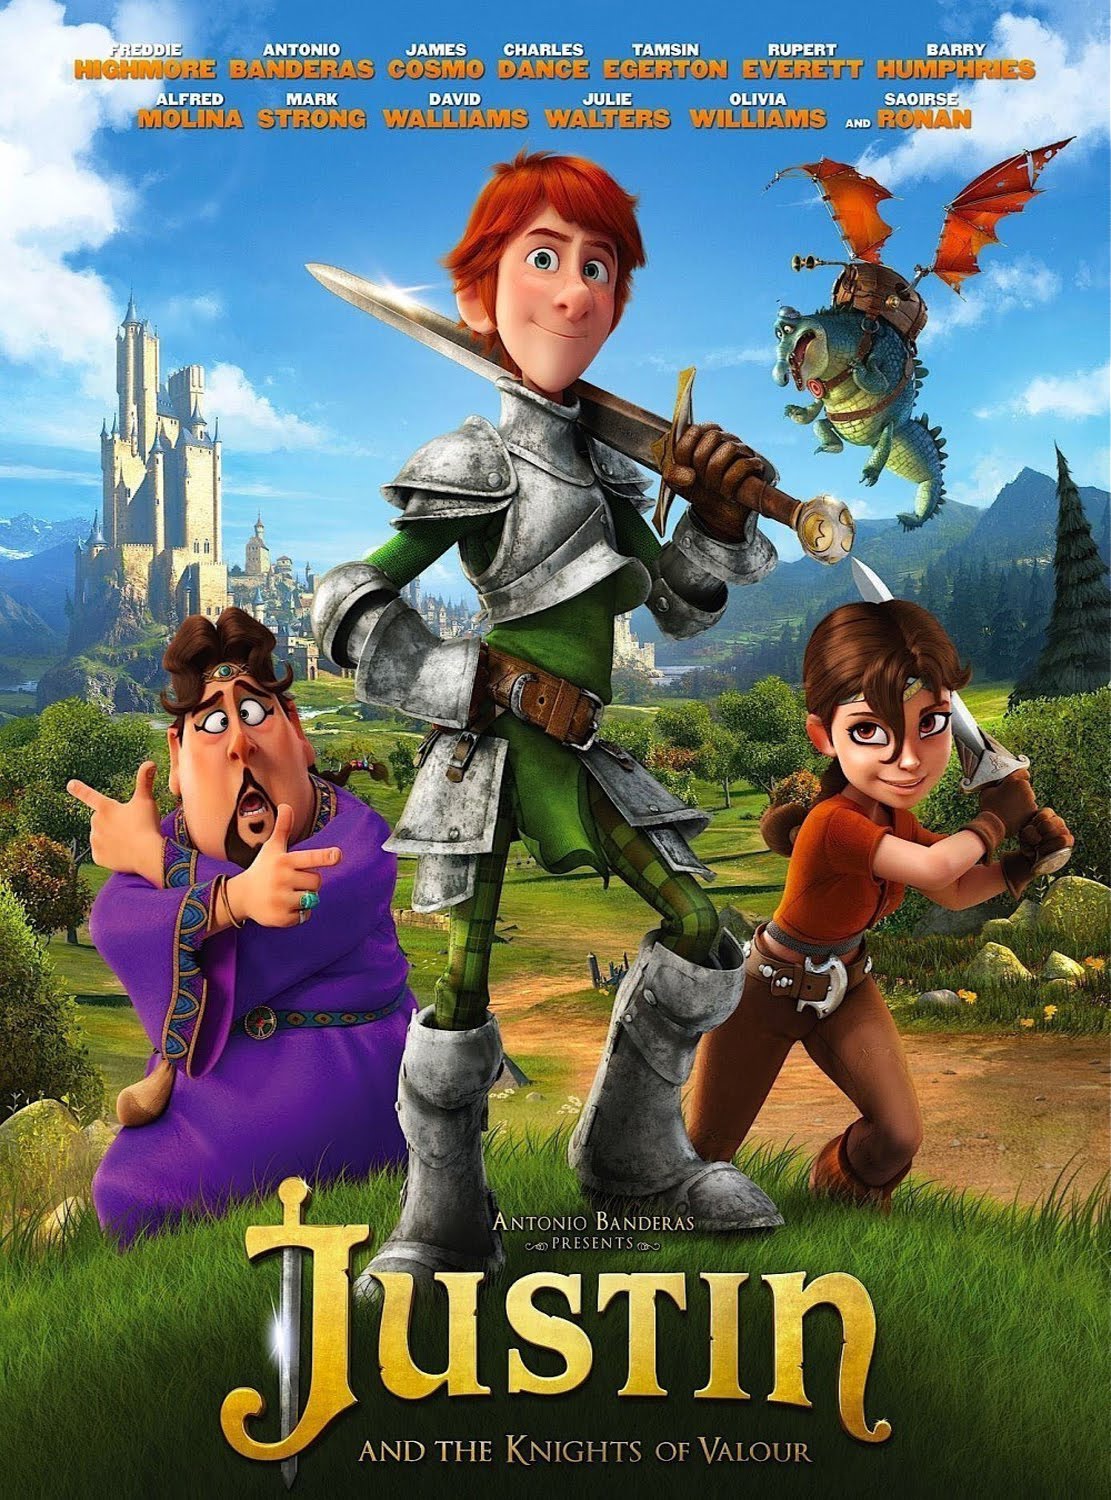 Justin and the Knights of Valour 2013 Hindi Dual Audio 500MB BluRay 720p HEVC x265 ESubs